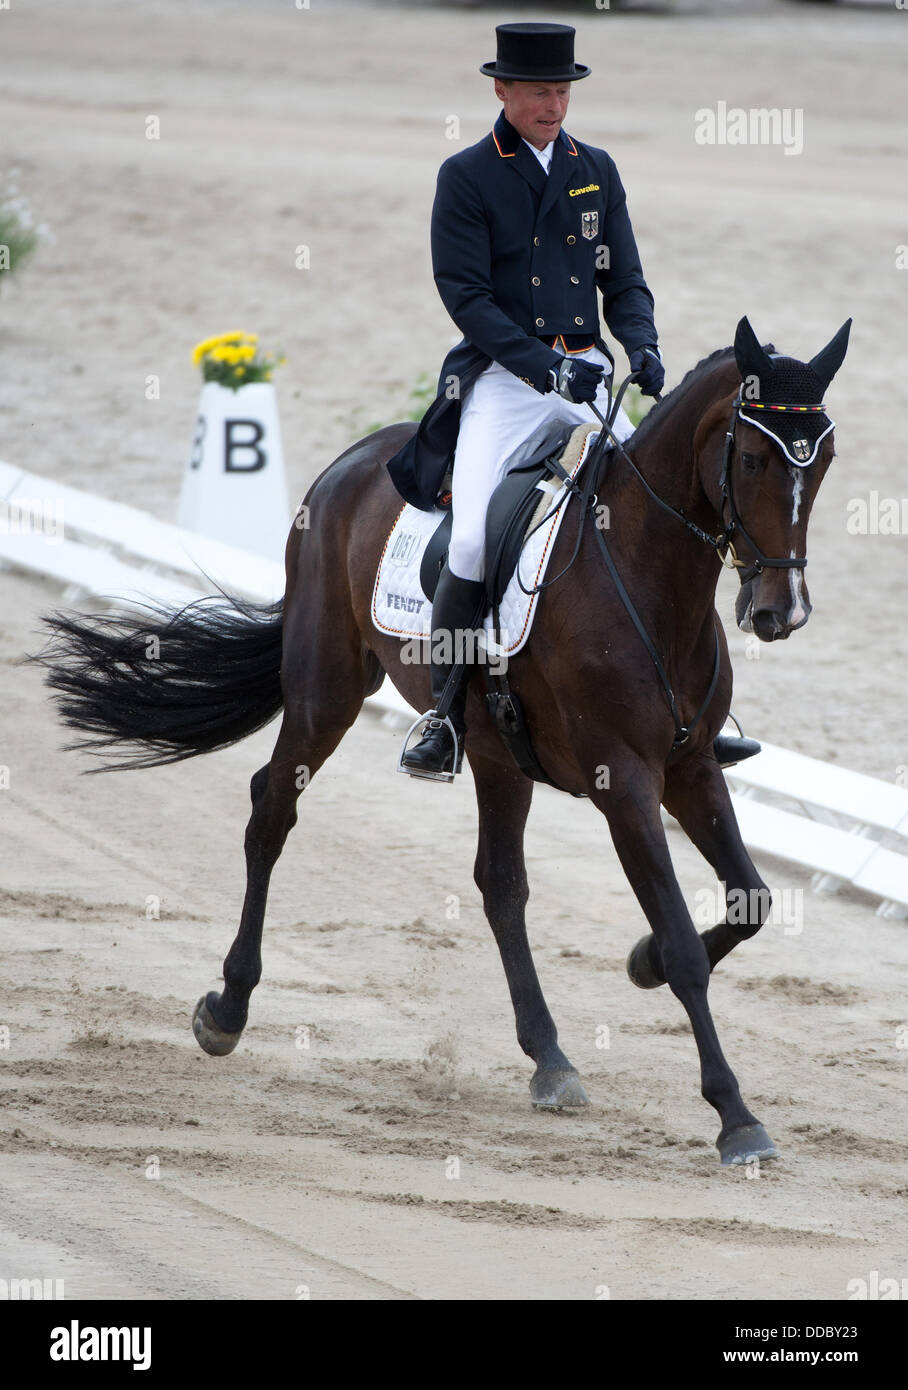 Malmoe, Sweden. 30th Aug, 2013. Eventer Michael Jung on his horse Halunke competes in the dressage event at the European Eventing Championships in Malmoe, Sweden, 30 August 2013. Photo: JOCHEN LUEBKE/dpa/Alamy Live News Stock Photo